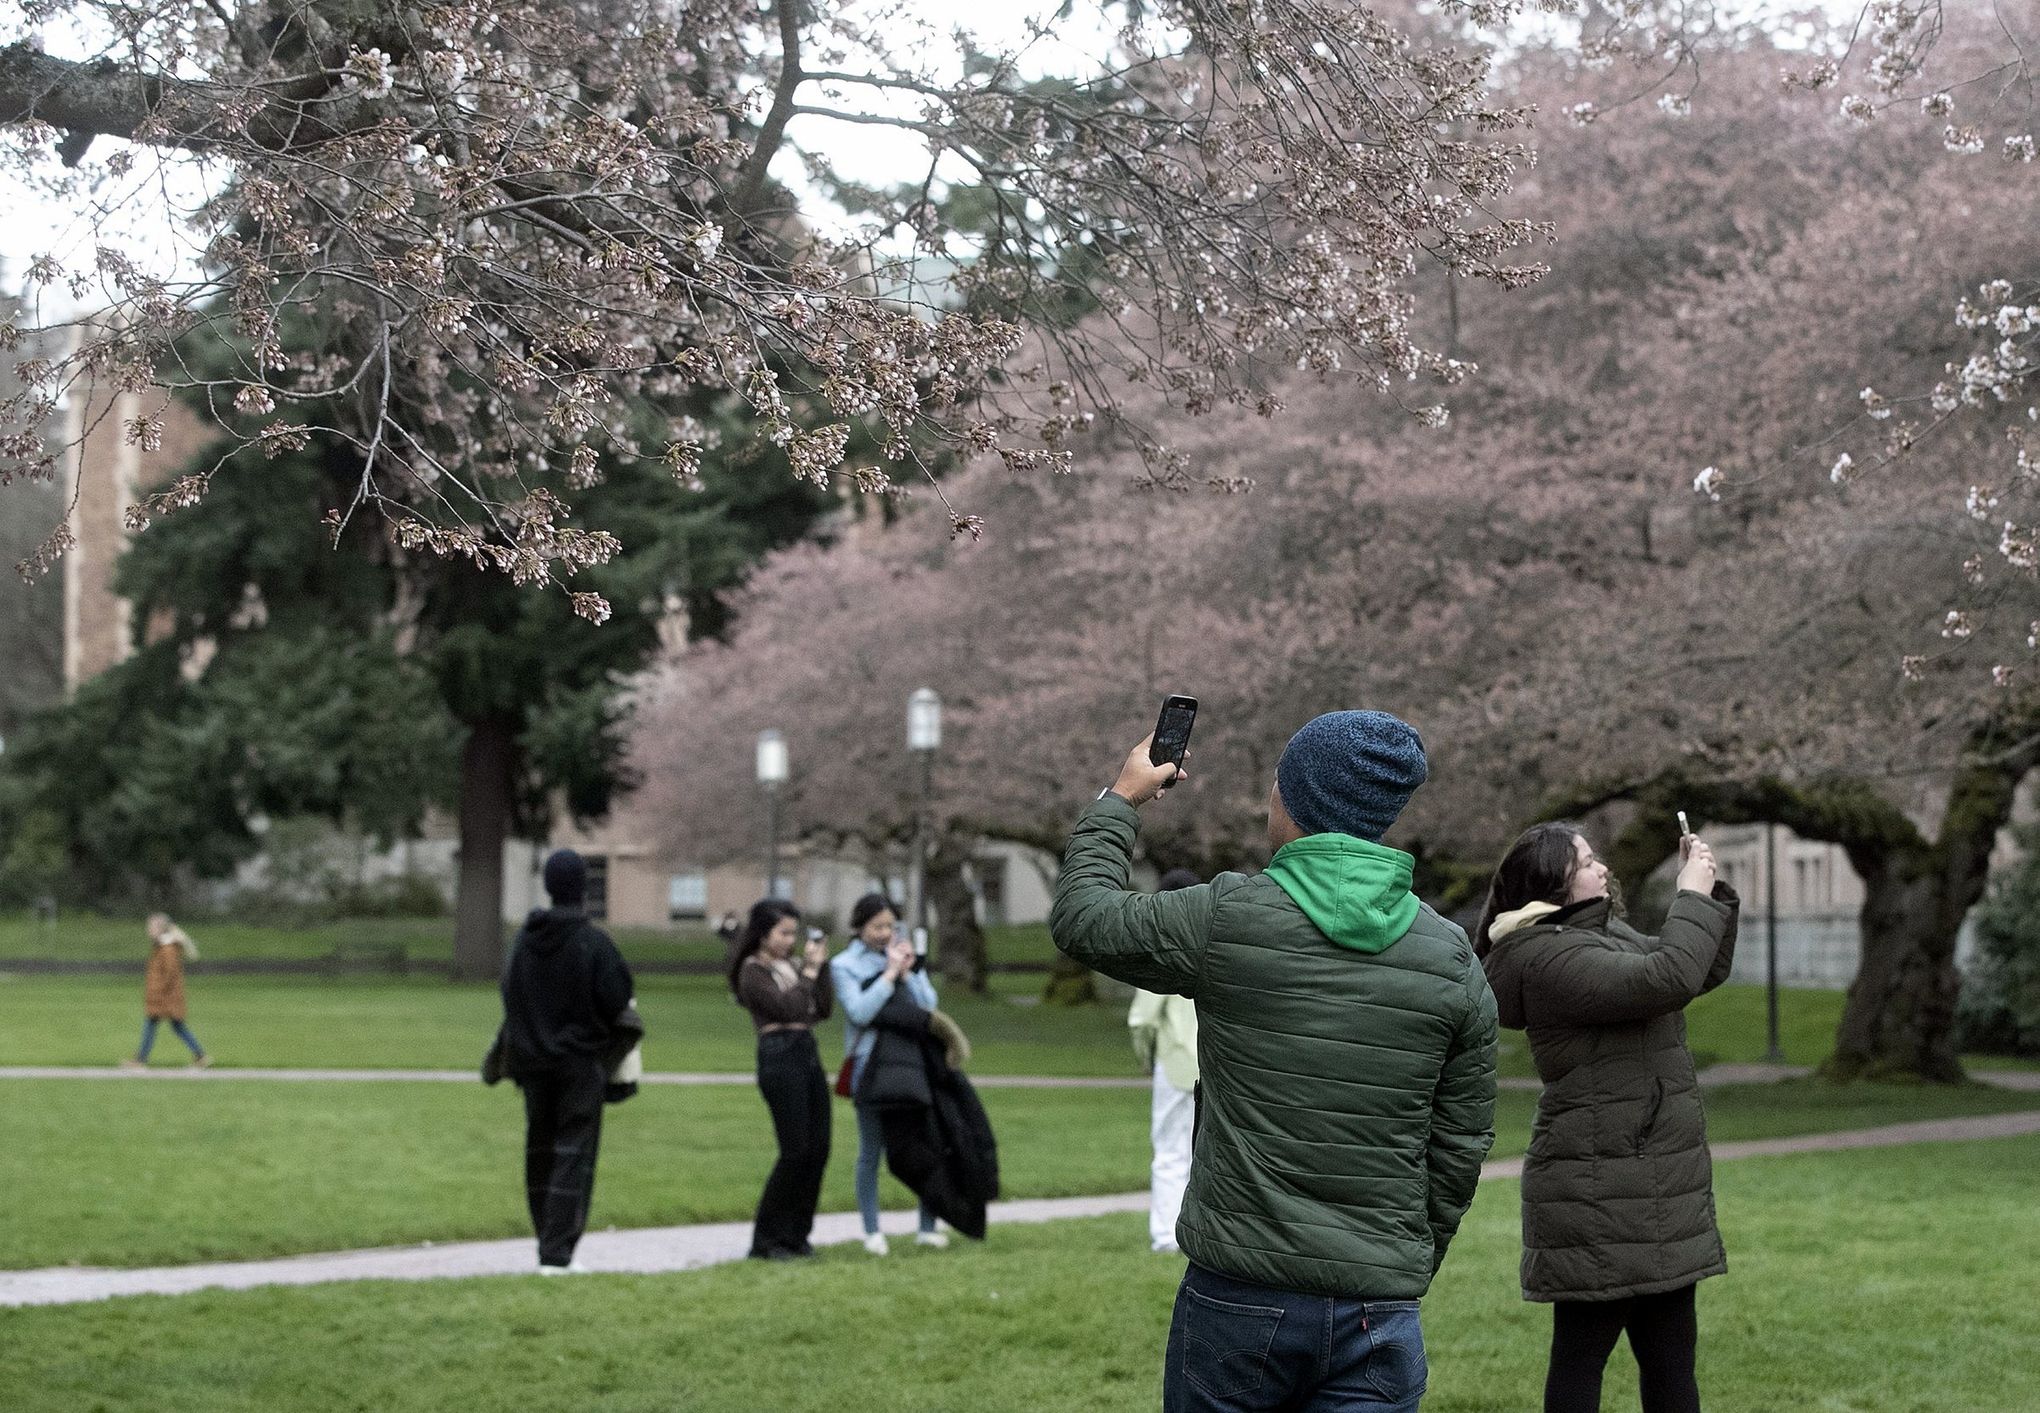 UW welcomes back cherry blossom admirers just in time for spring's